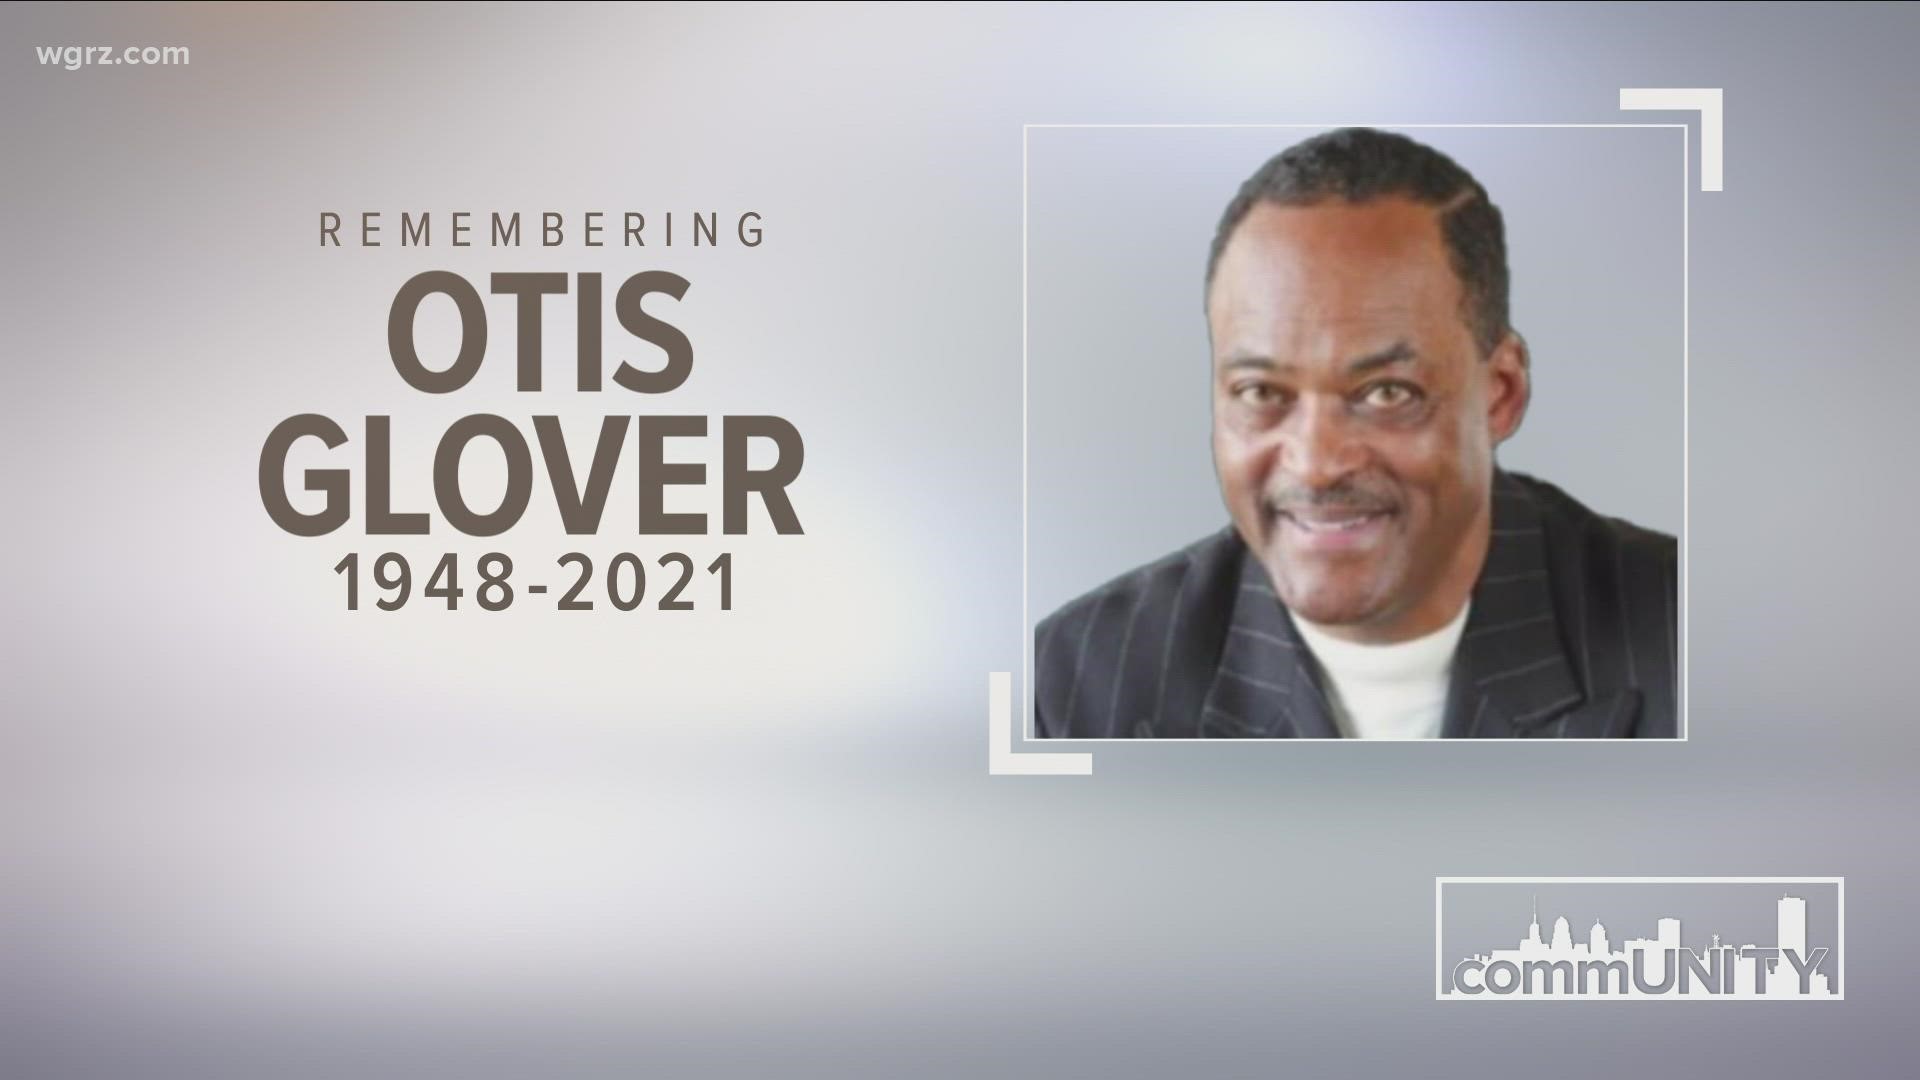 commUNITY pays tribute to the late Otis Glover, who was also known as Mr. Rock.